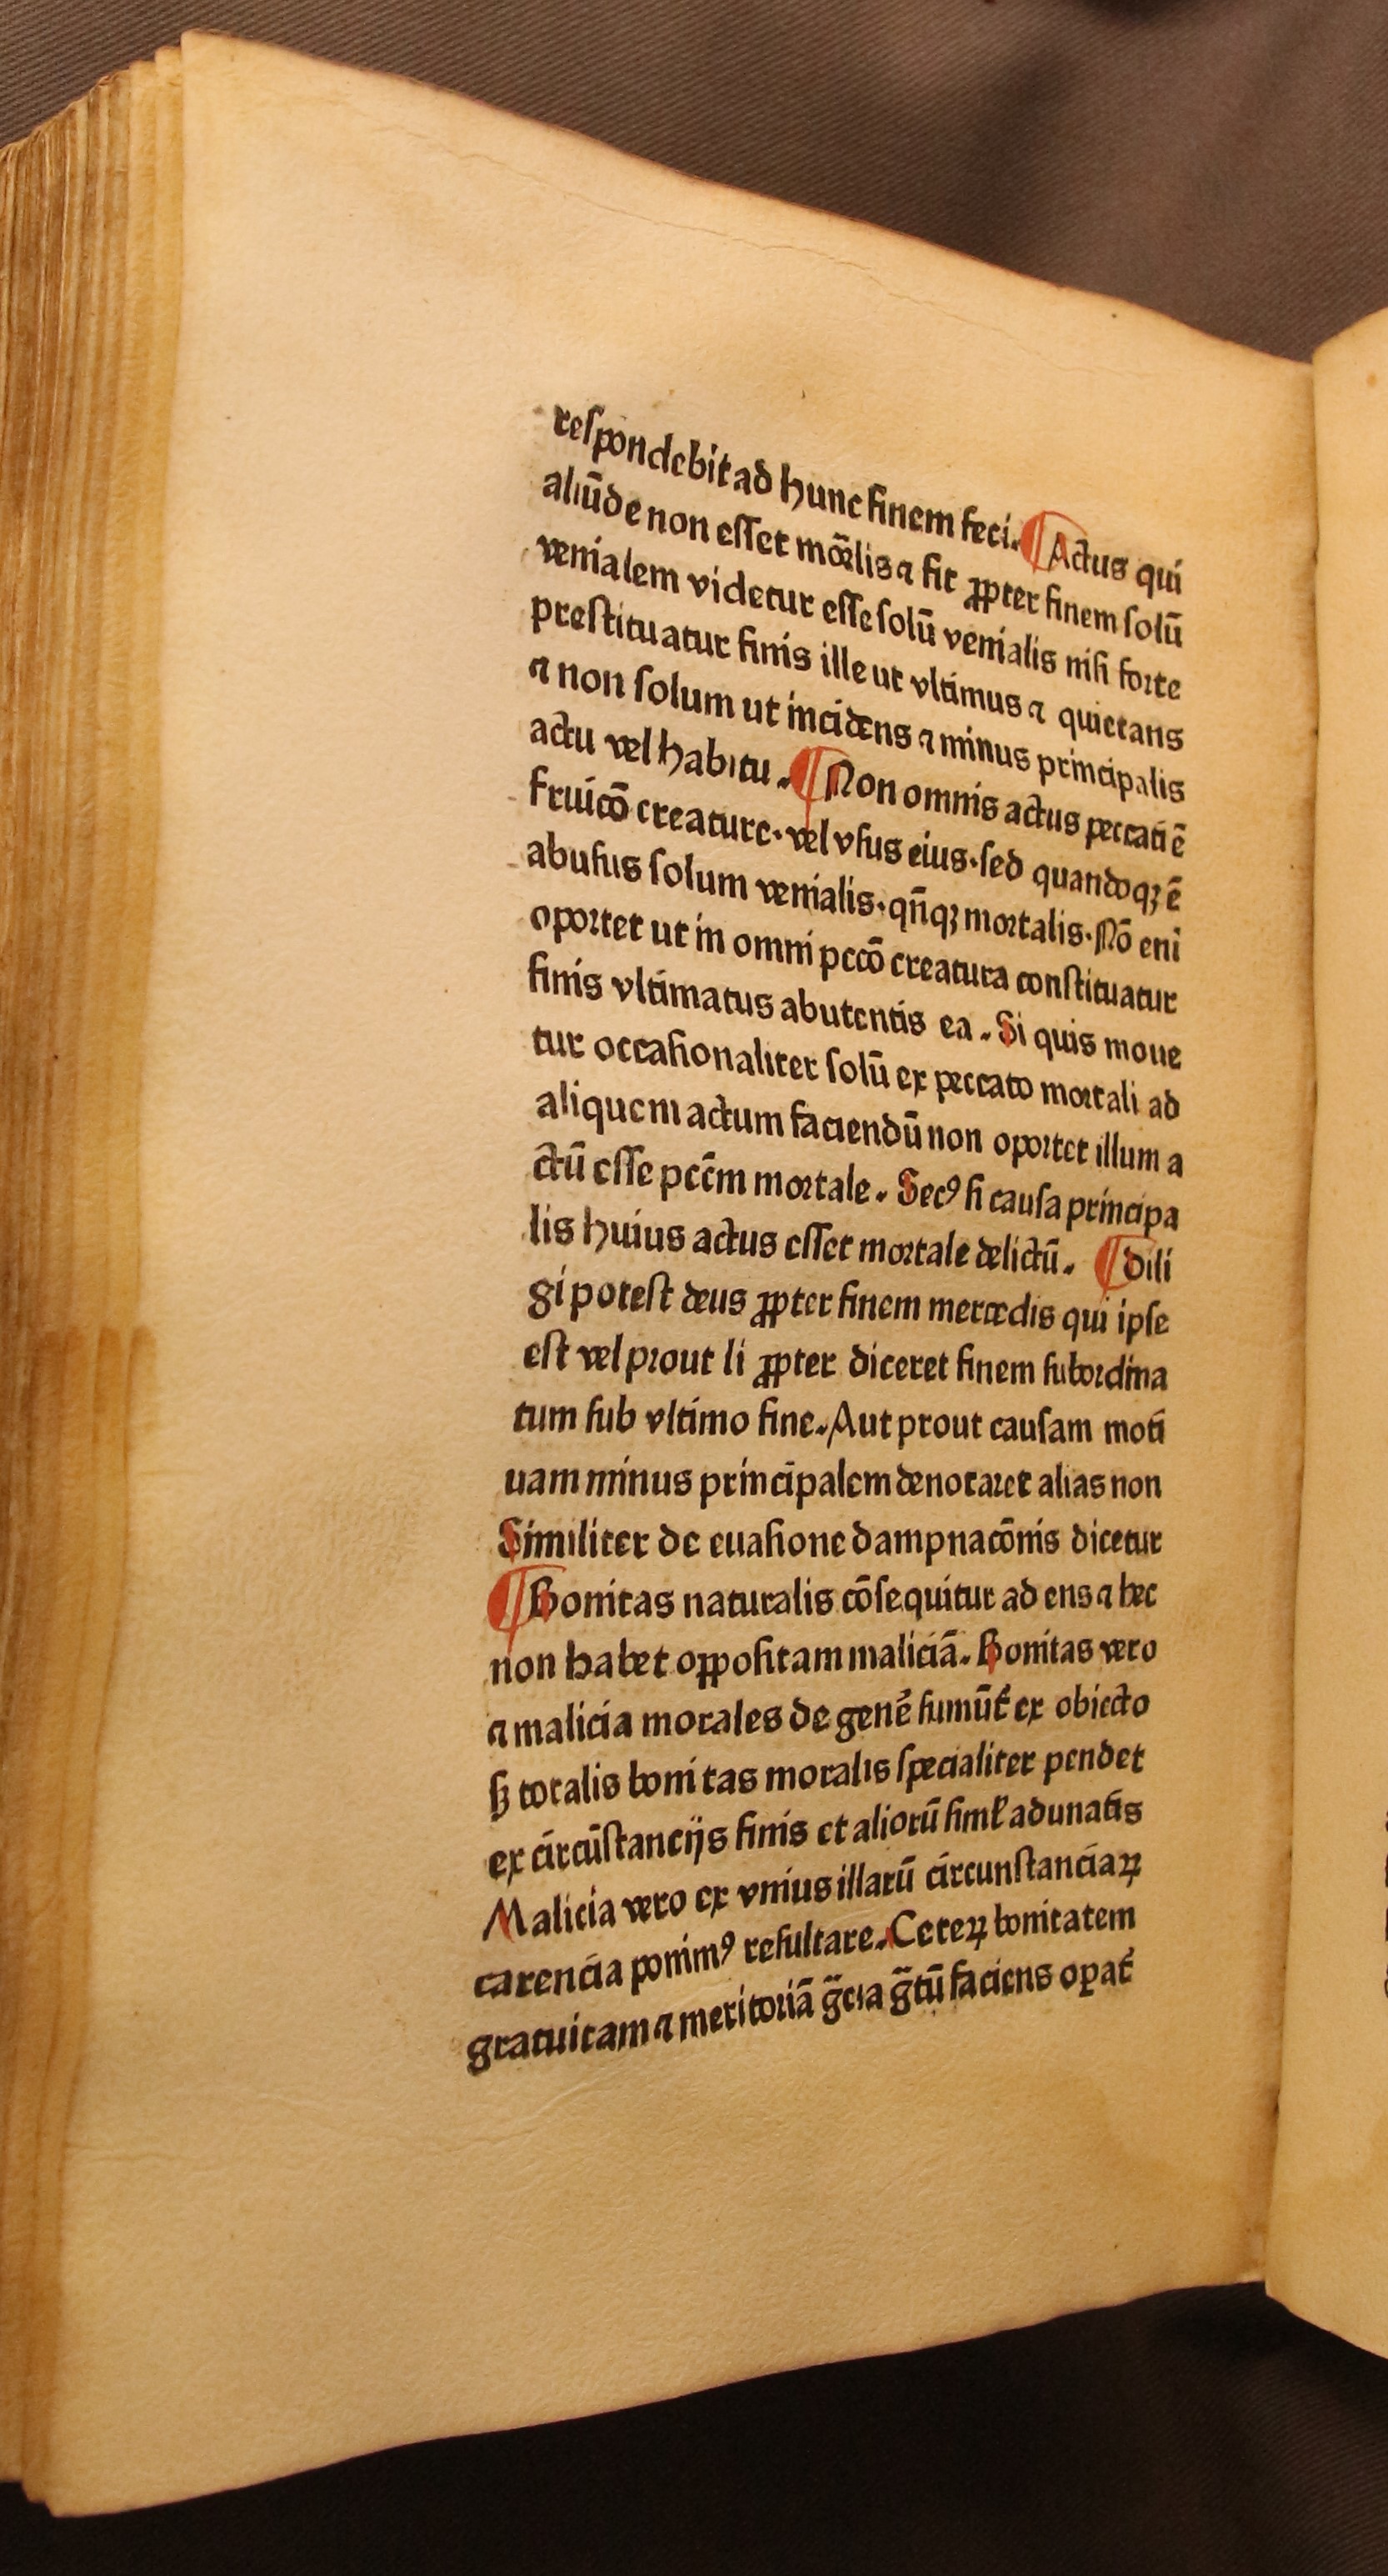 Ill. 3: A work on the ecclesiastical calendar of Johannes Langer de Bolkinhayn, printed by Peter Schöffer in Mainz in 1489